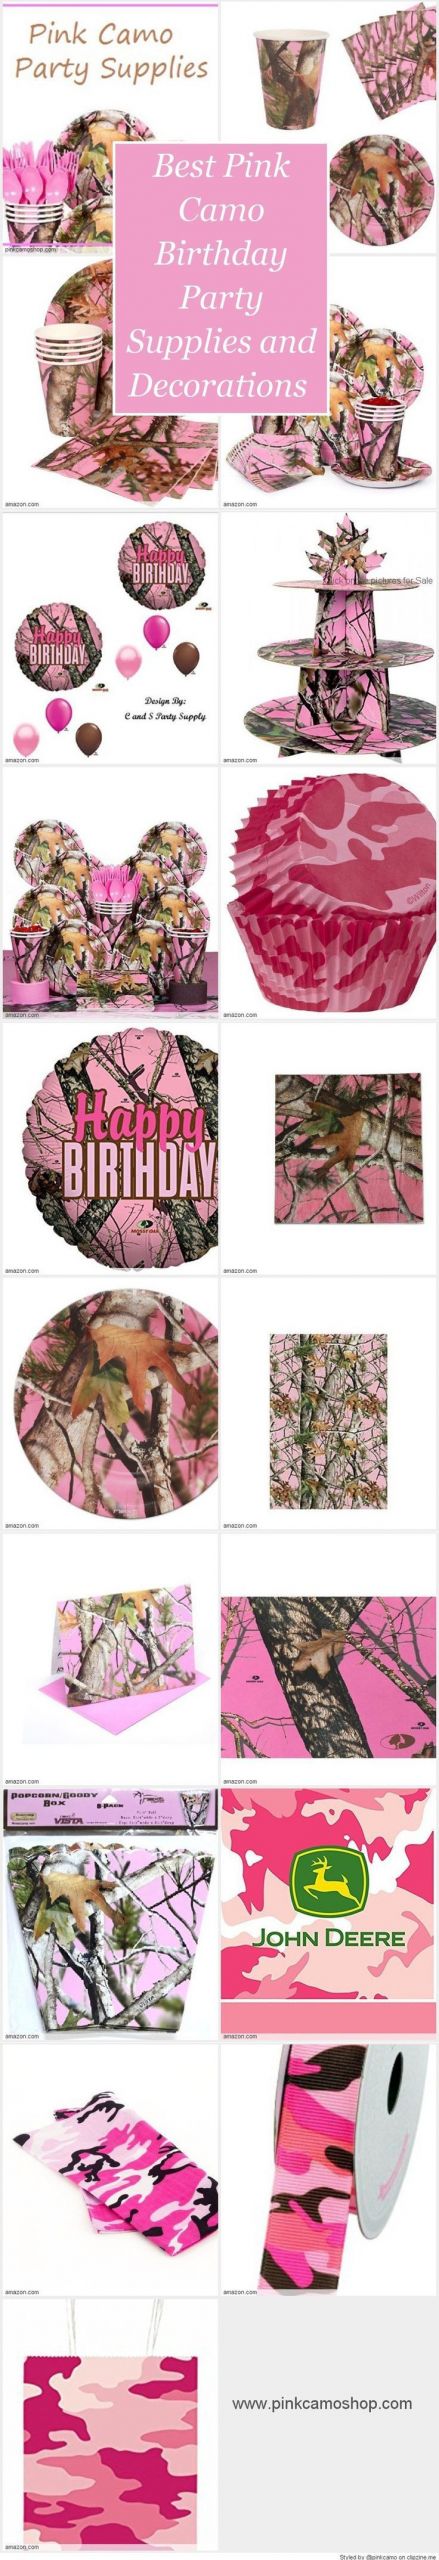 Pink Camouflage Birthday Party Ideas
 53 best Camo Party Ideas images on Pinterest